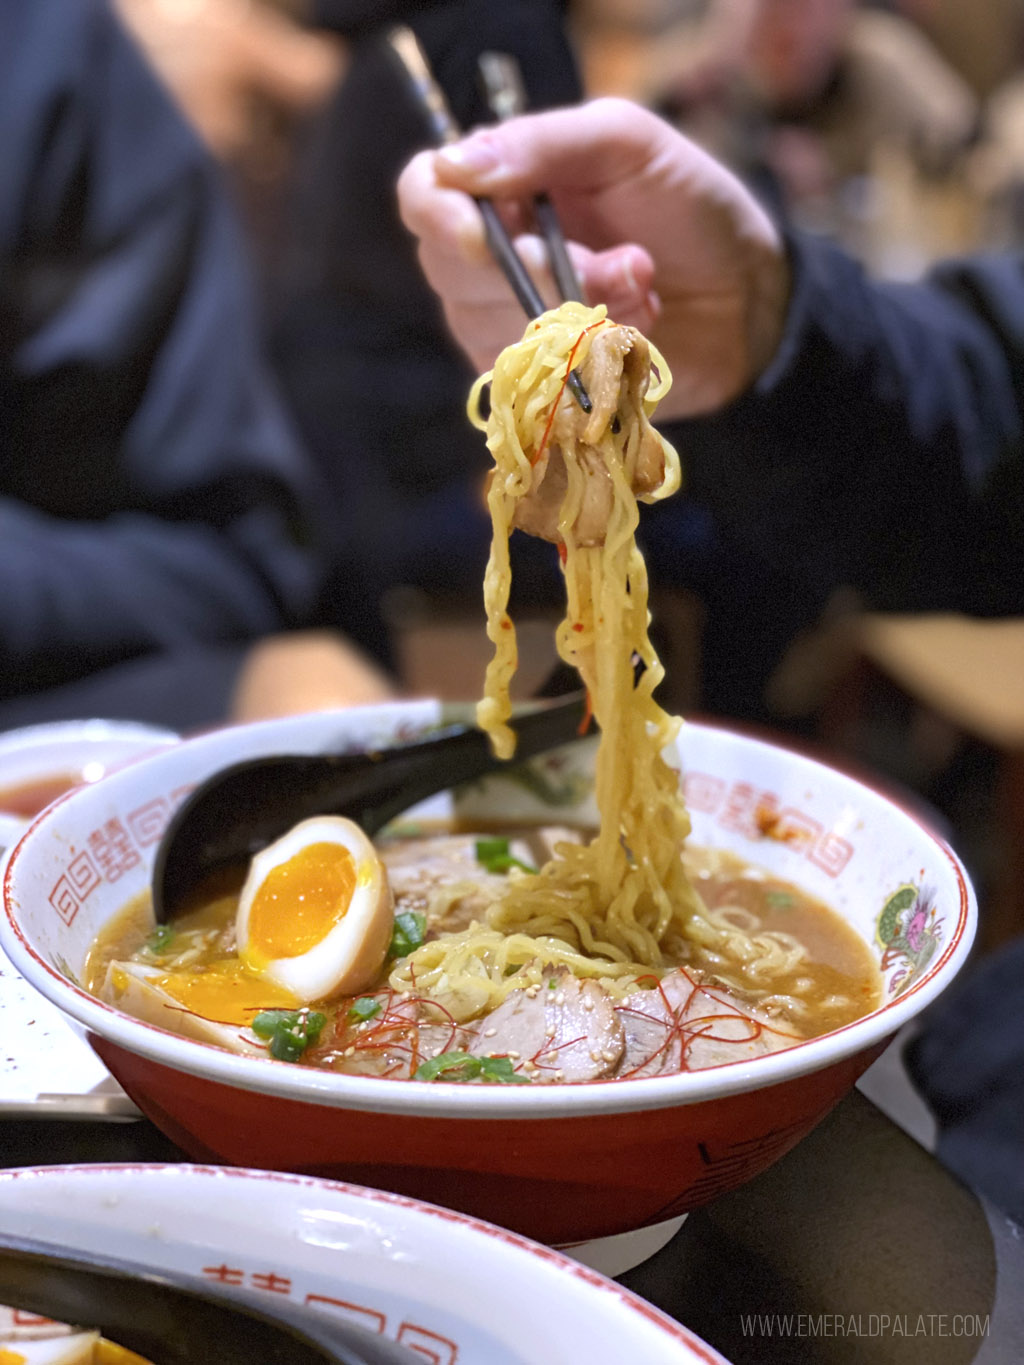 person lifting up noodles from a ramen bowl in Whistler